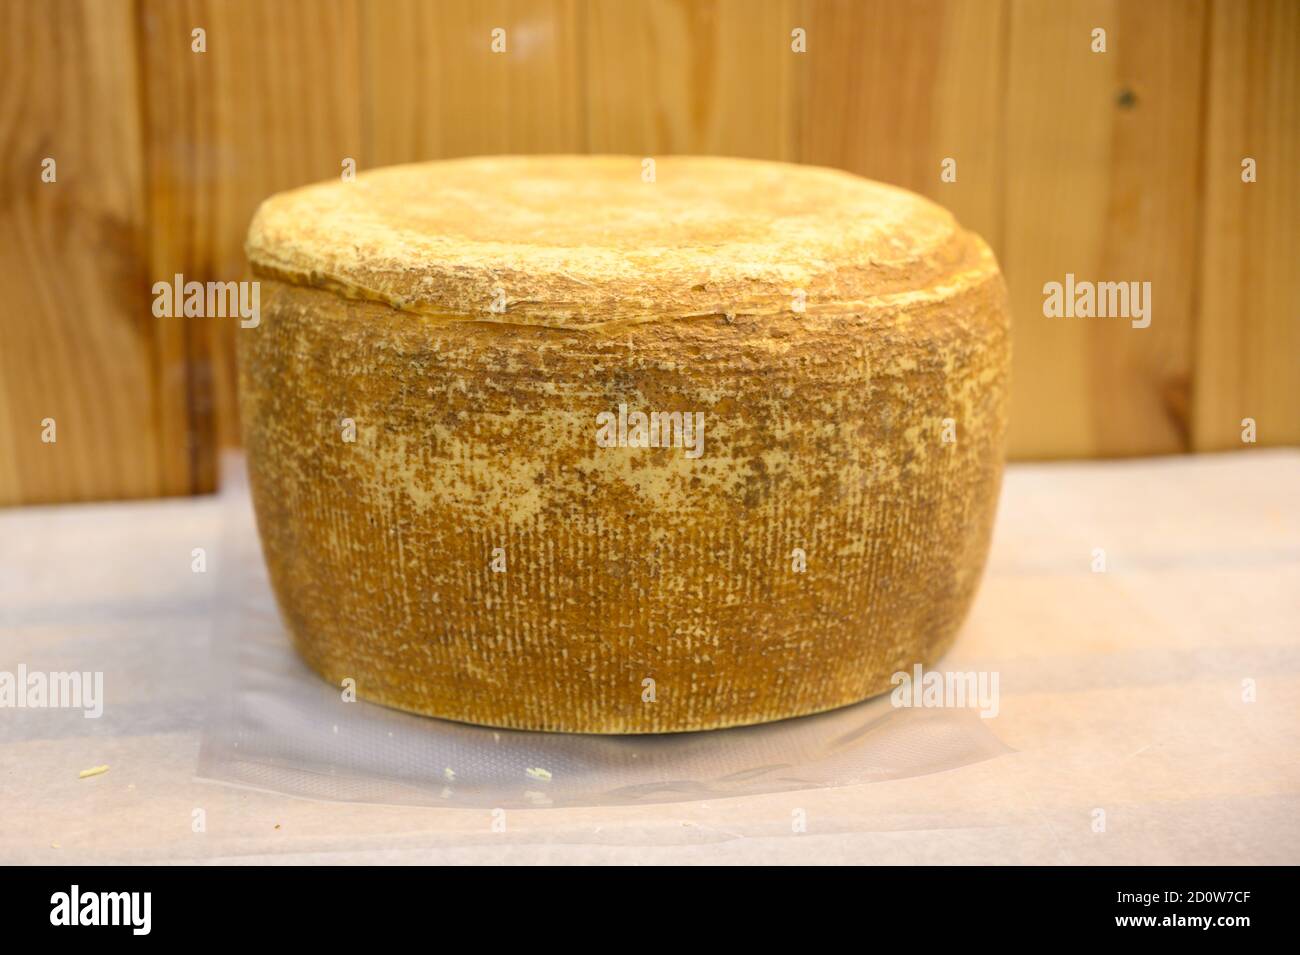 Cheese collection, whole French beaufort or abondance cow milk cheese from Savoy region Stock Photo